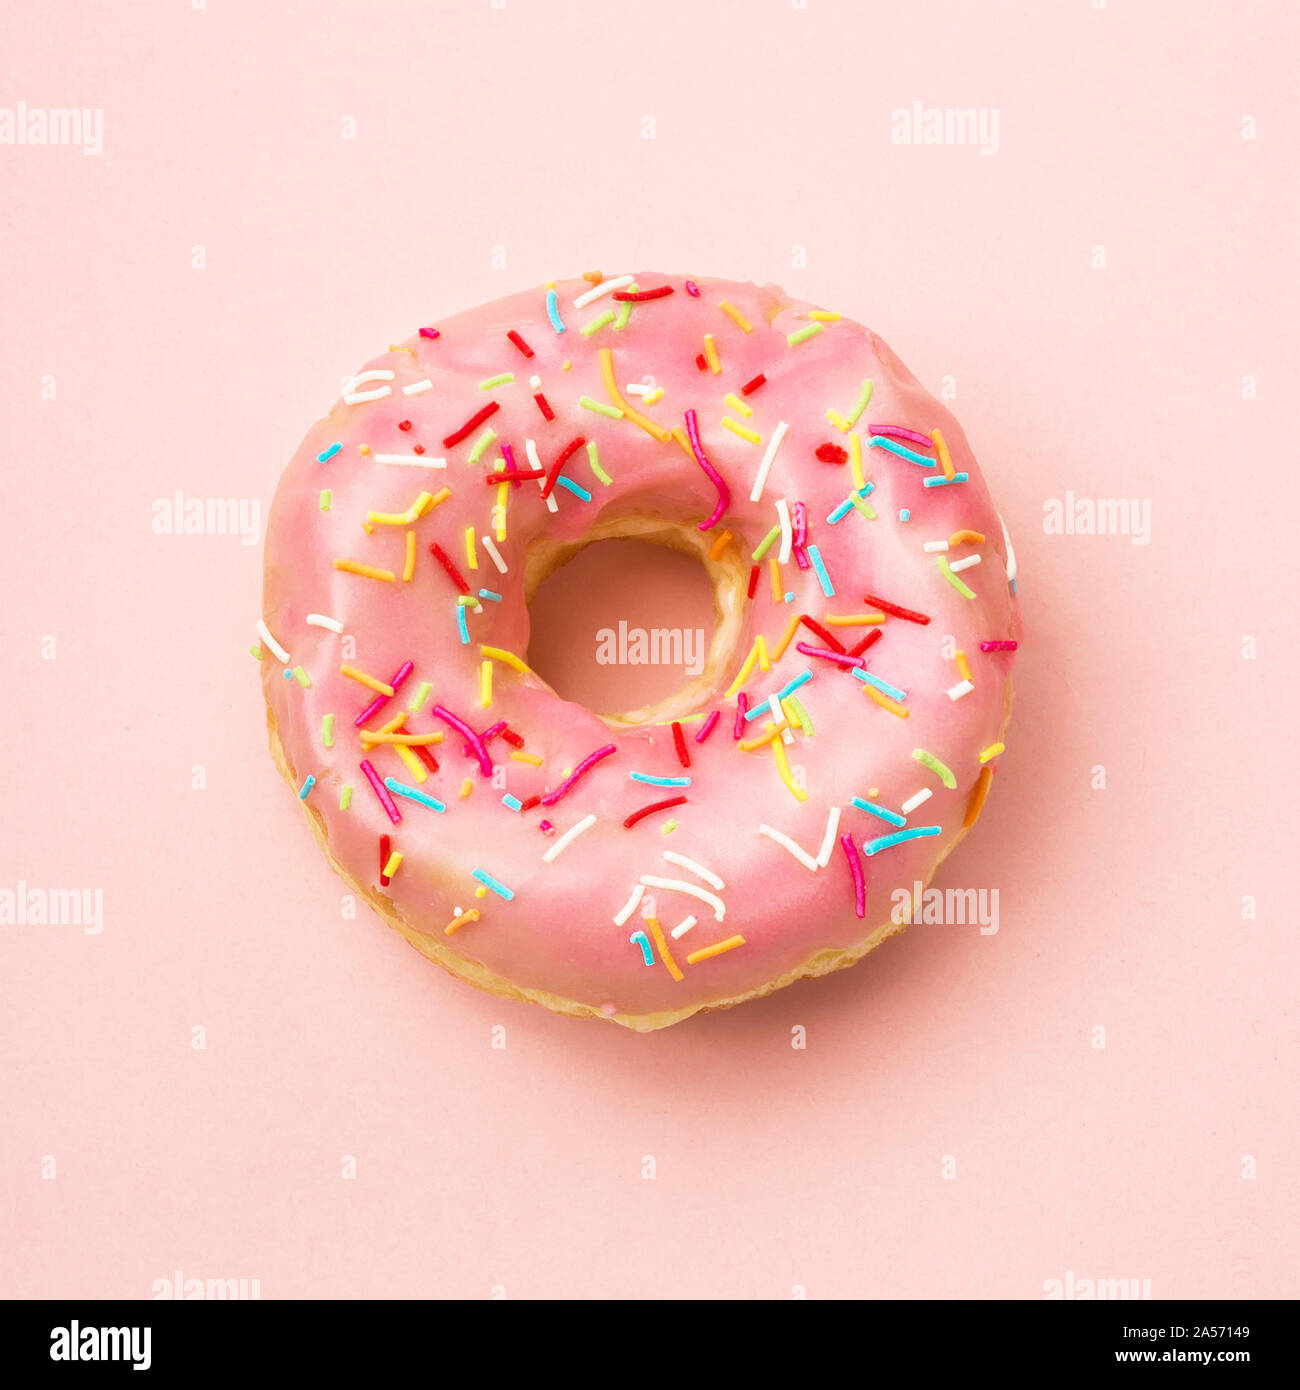 Pink donut decorated with sprinkles on coral background. Flat lay Stock Photo